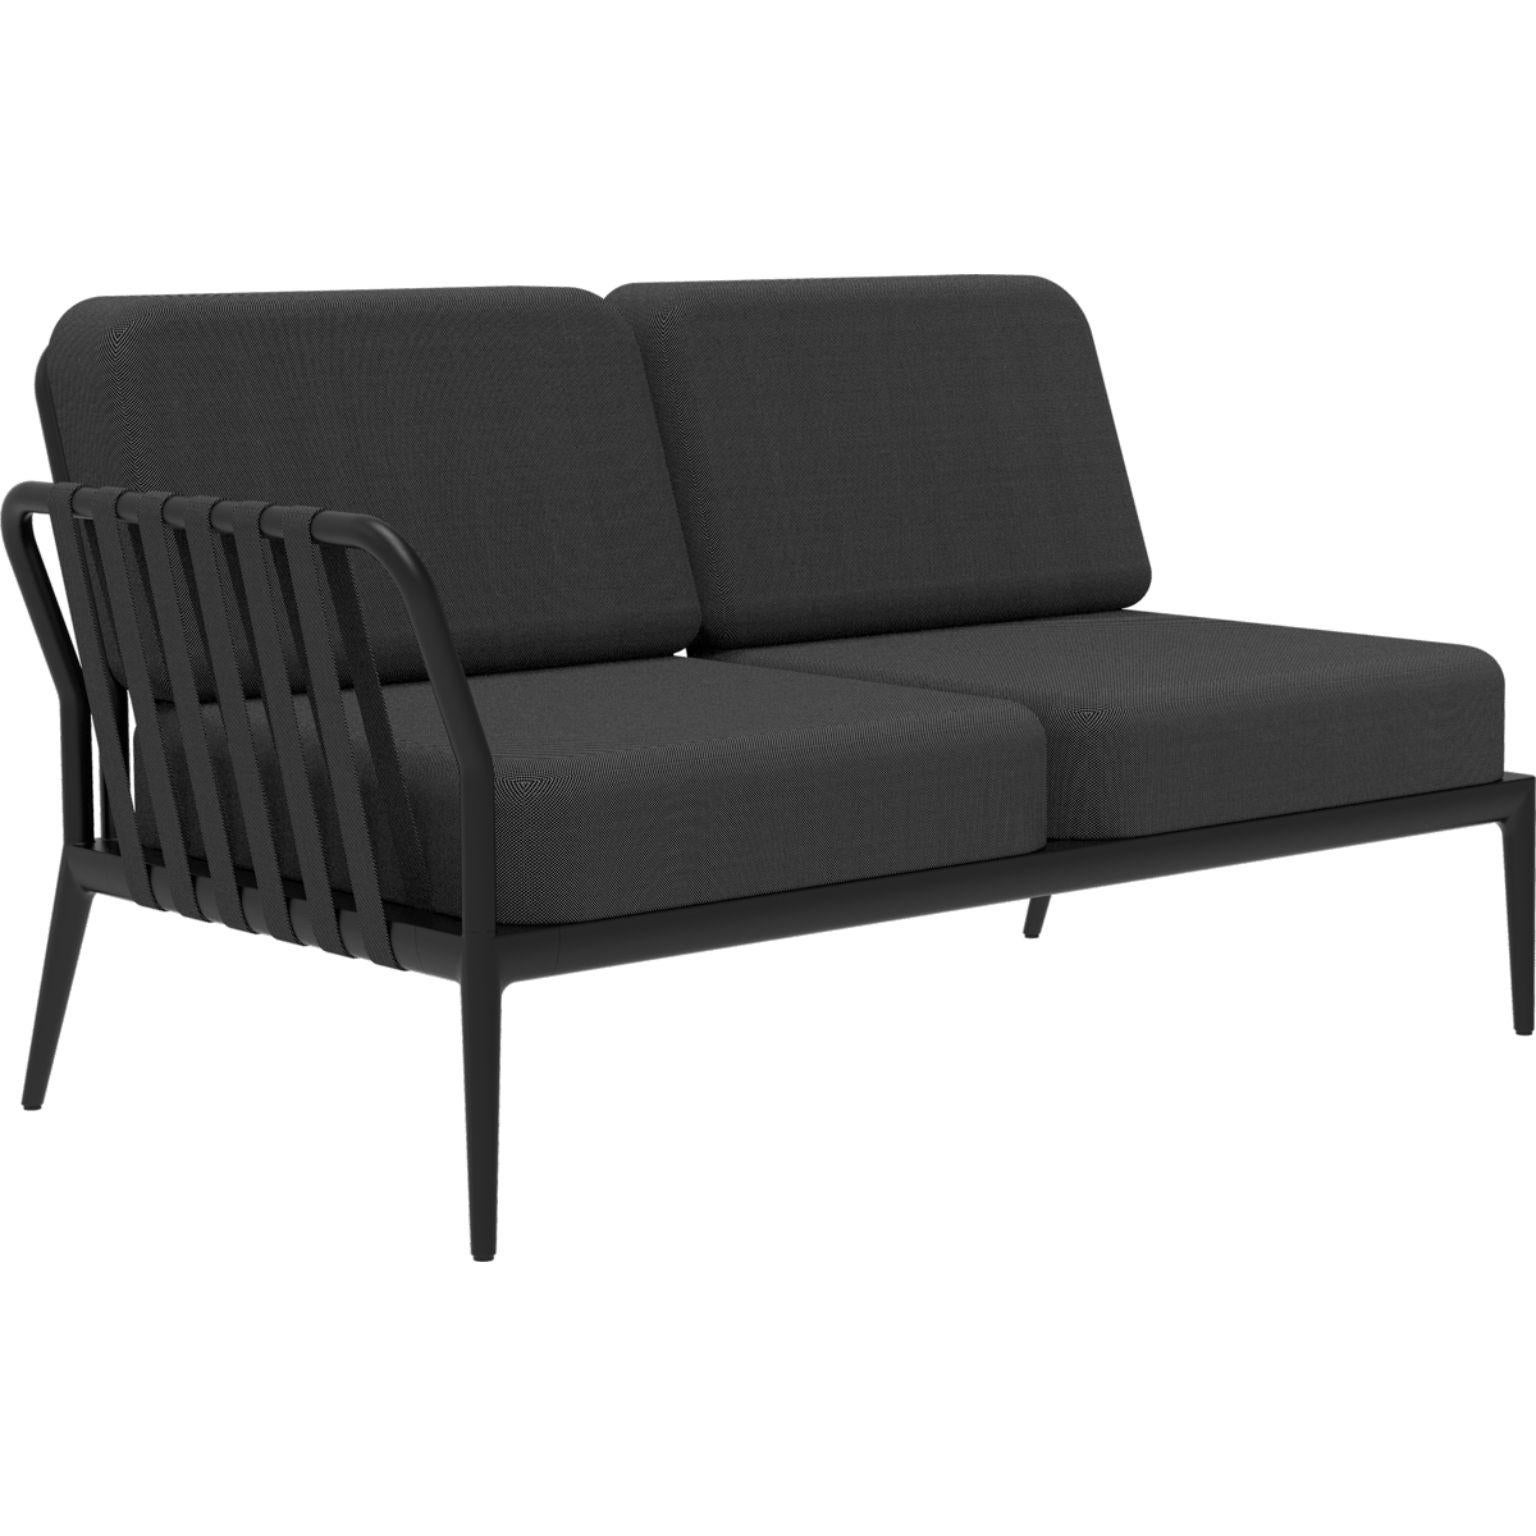 Ribbons black double right modular sofa by MOWEE
Dimensions: D83 x W148 x H81 cm (seat height 42 cm).
Material: Aluminium and upholstery.
Weight: 29 kg
Also available in different colors and finishes.

An unmistakable collection for its beauty